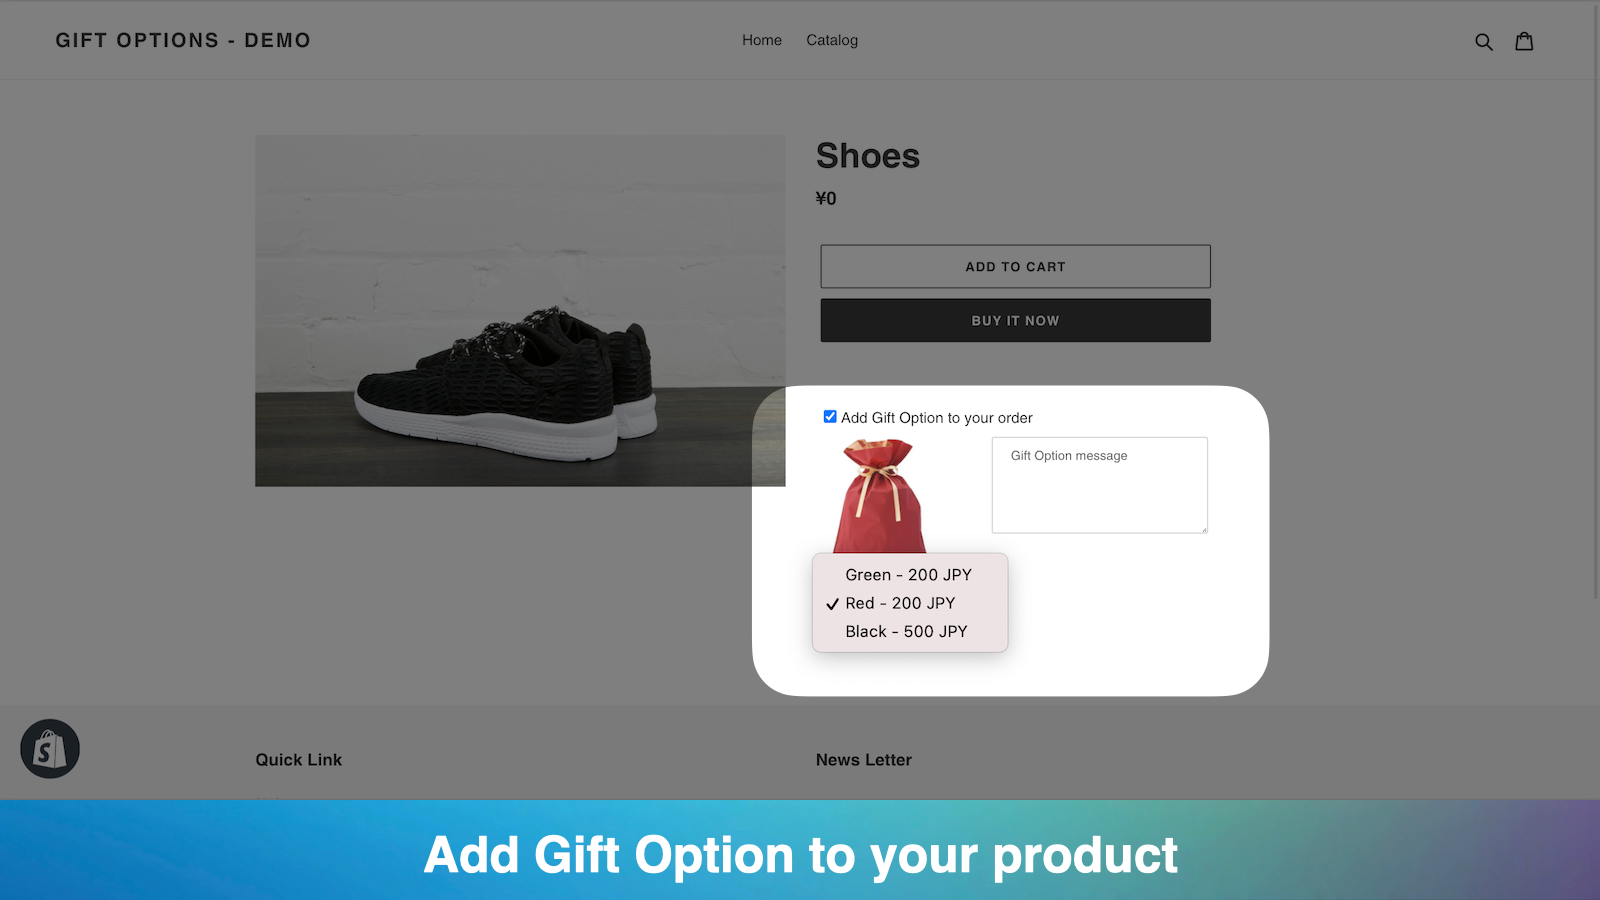 Add Gift Option to your product